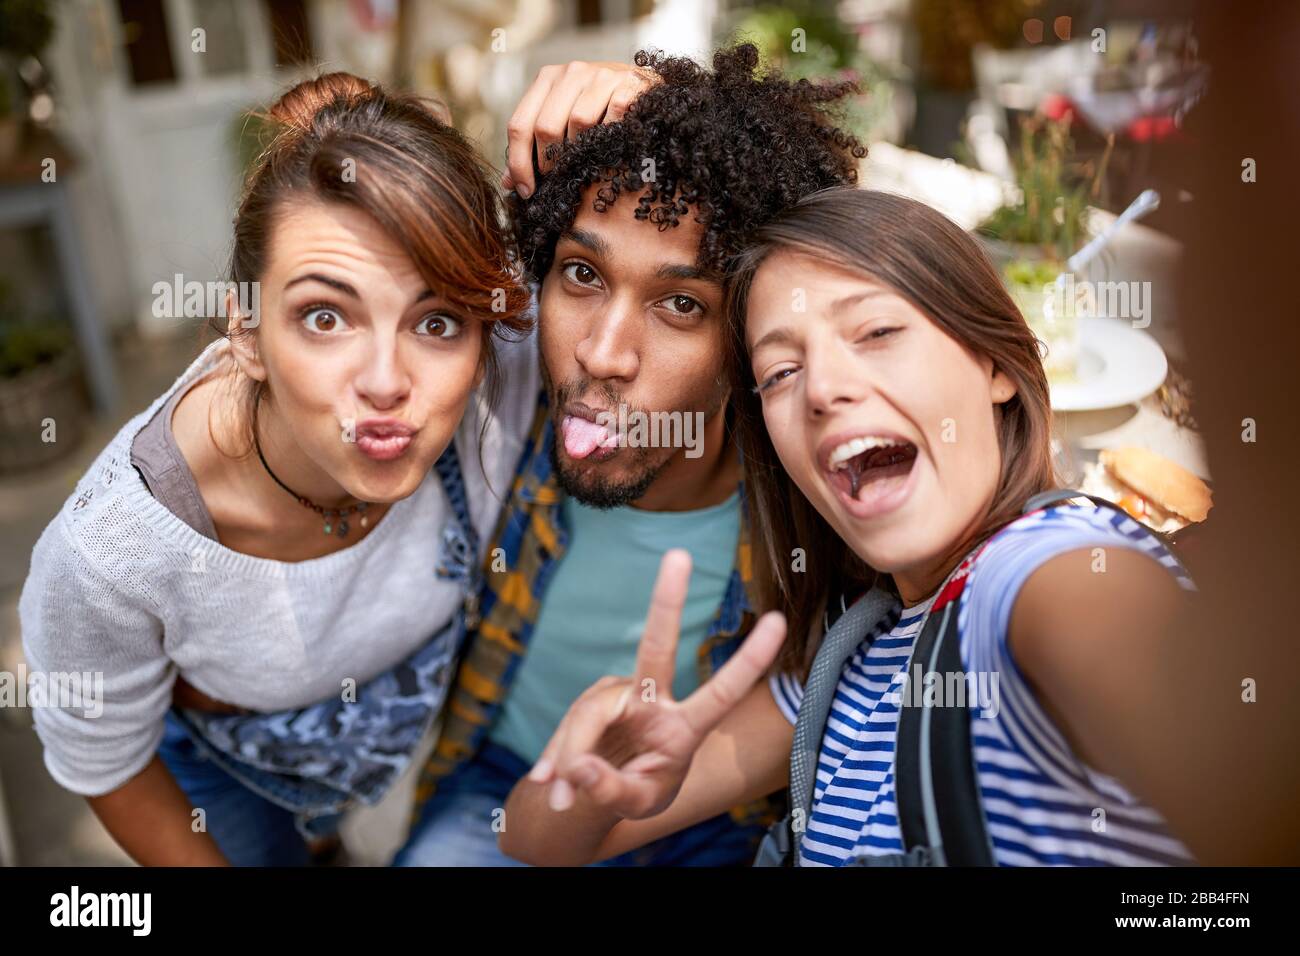 Afro-American male with female makes funny face Stock Photo